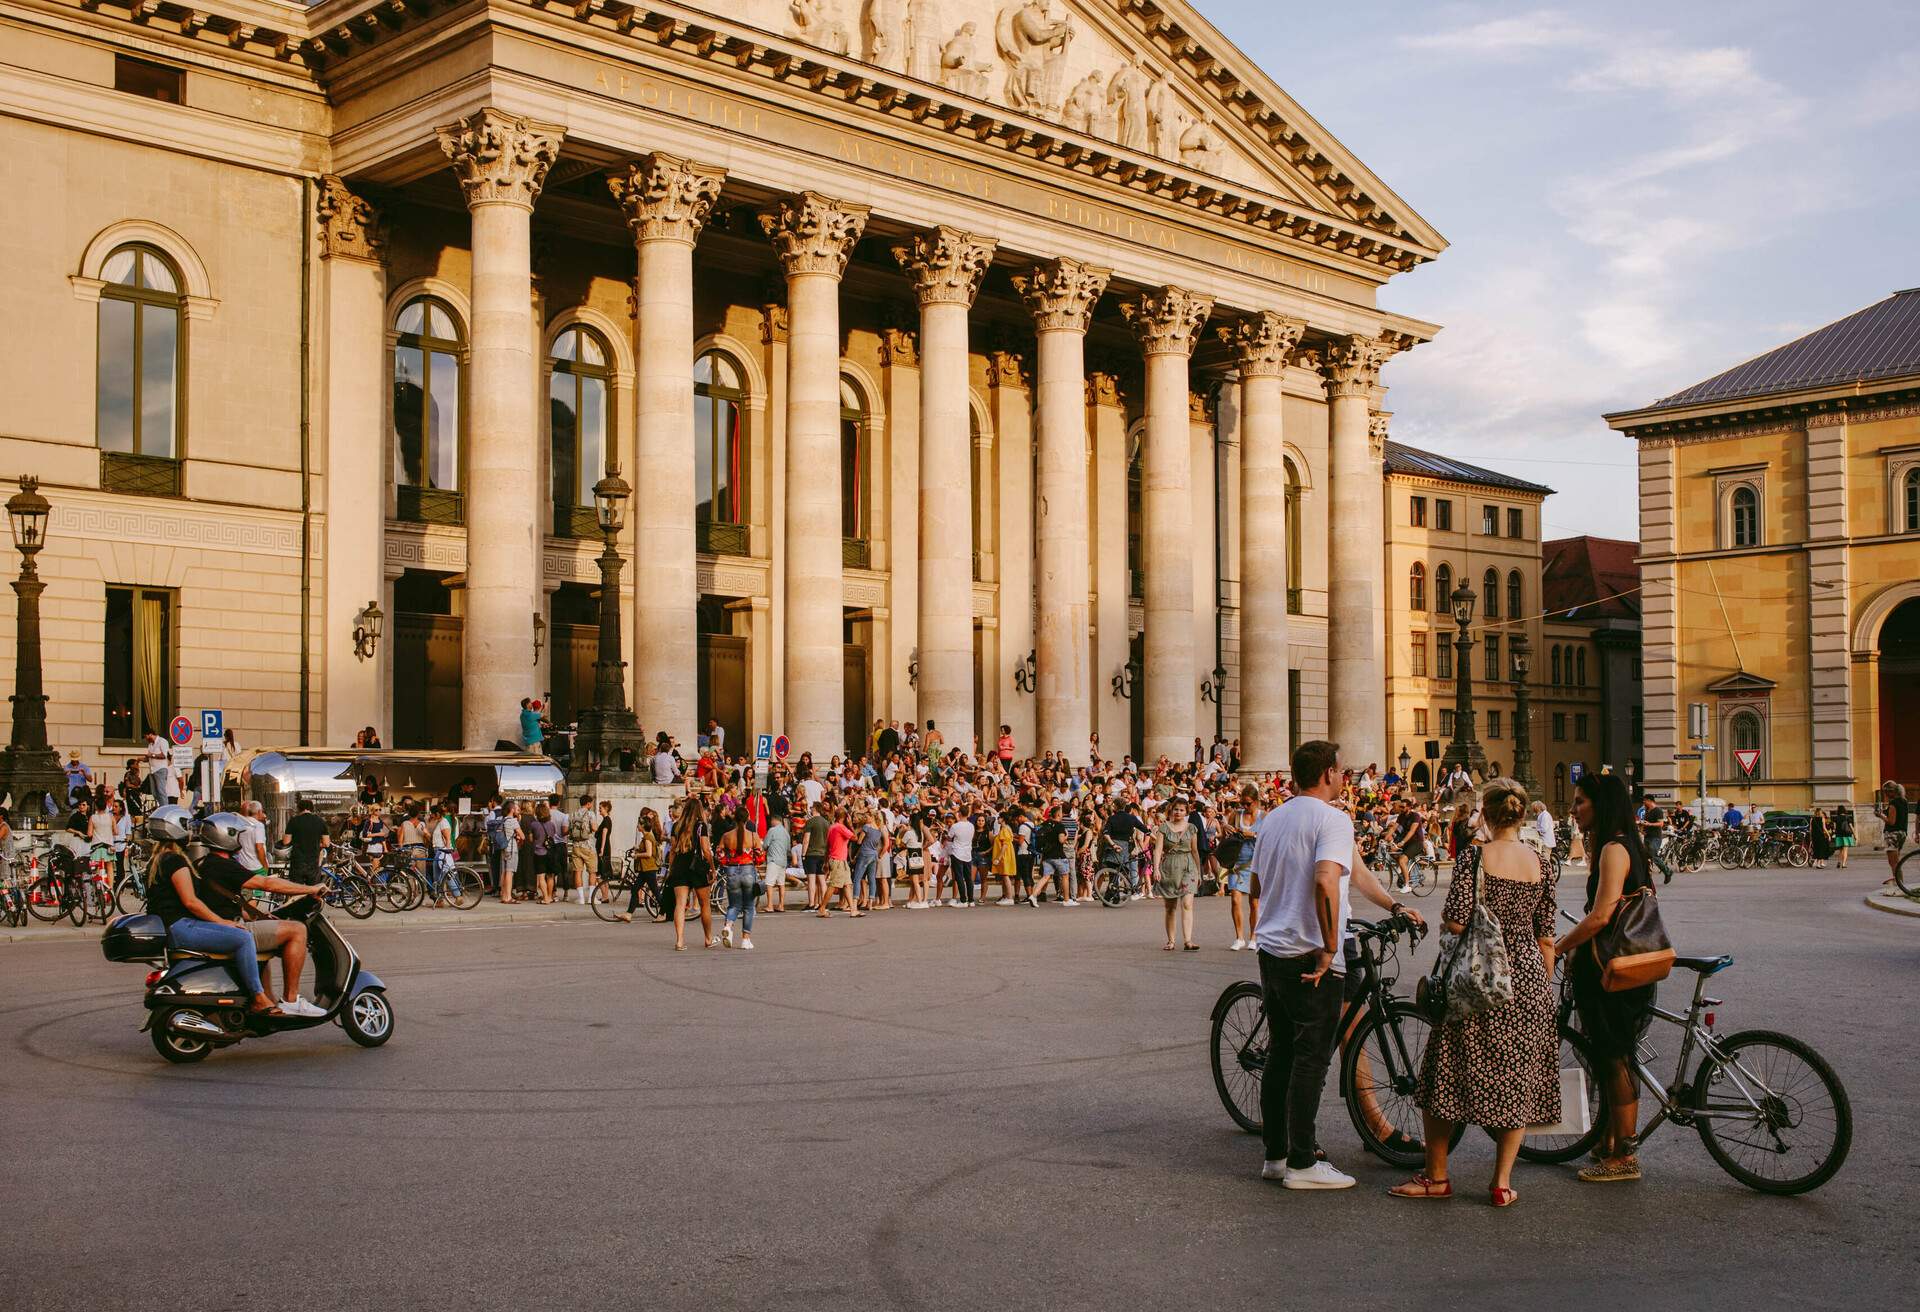 A bustling crowd seated outside a historic neoclassical-style theatre with pillars.